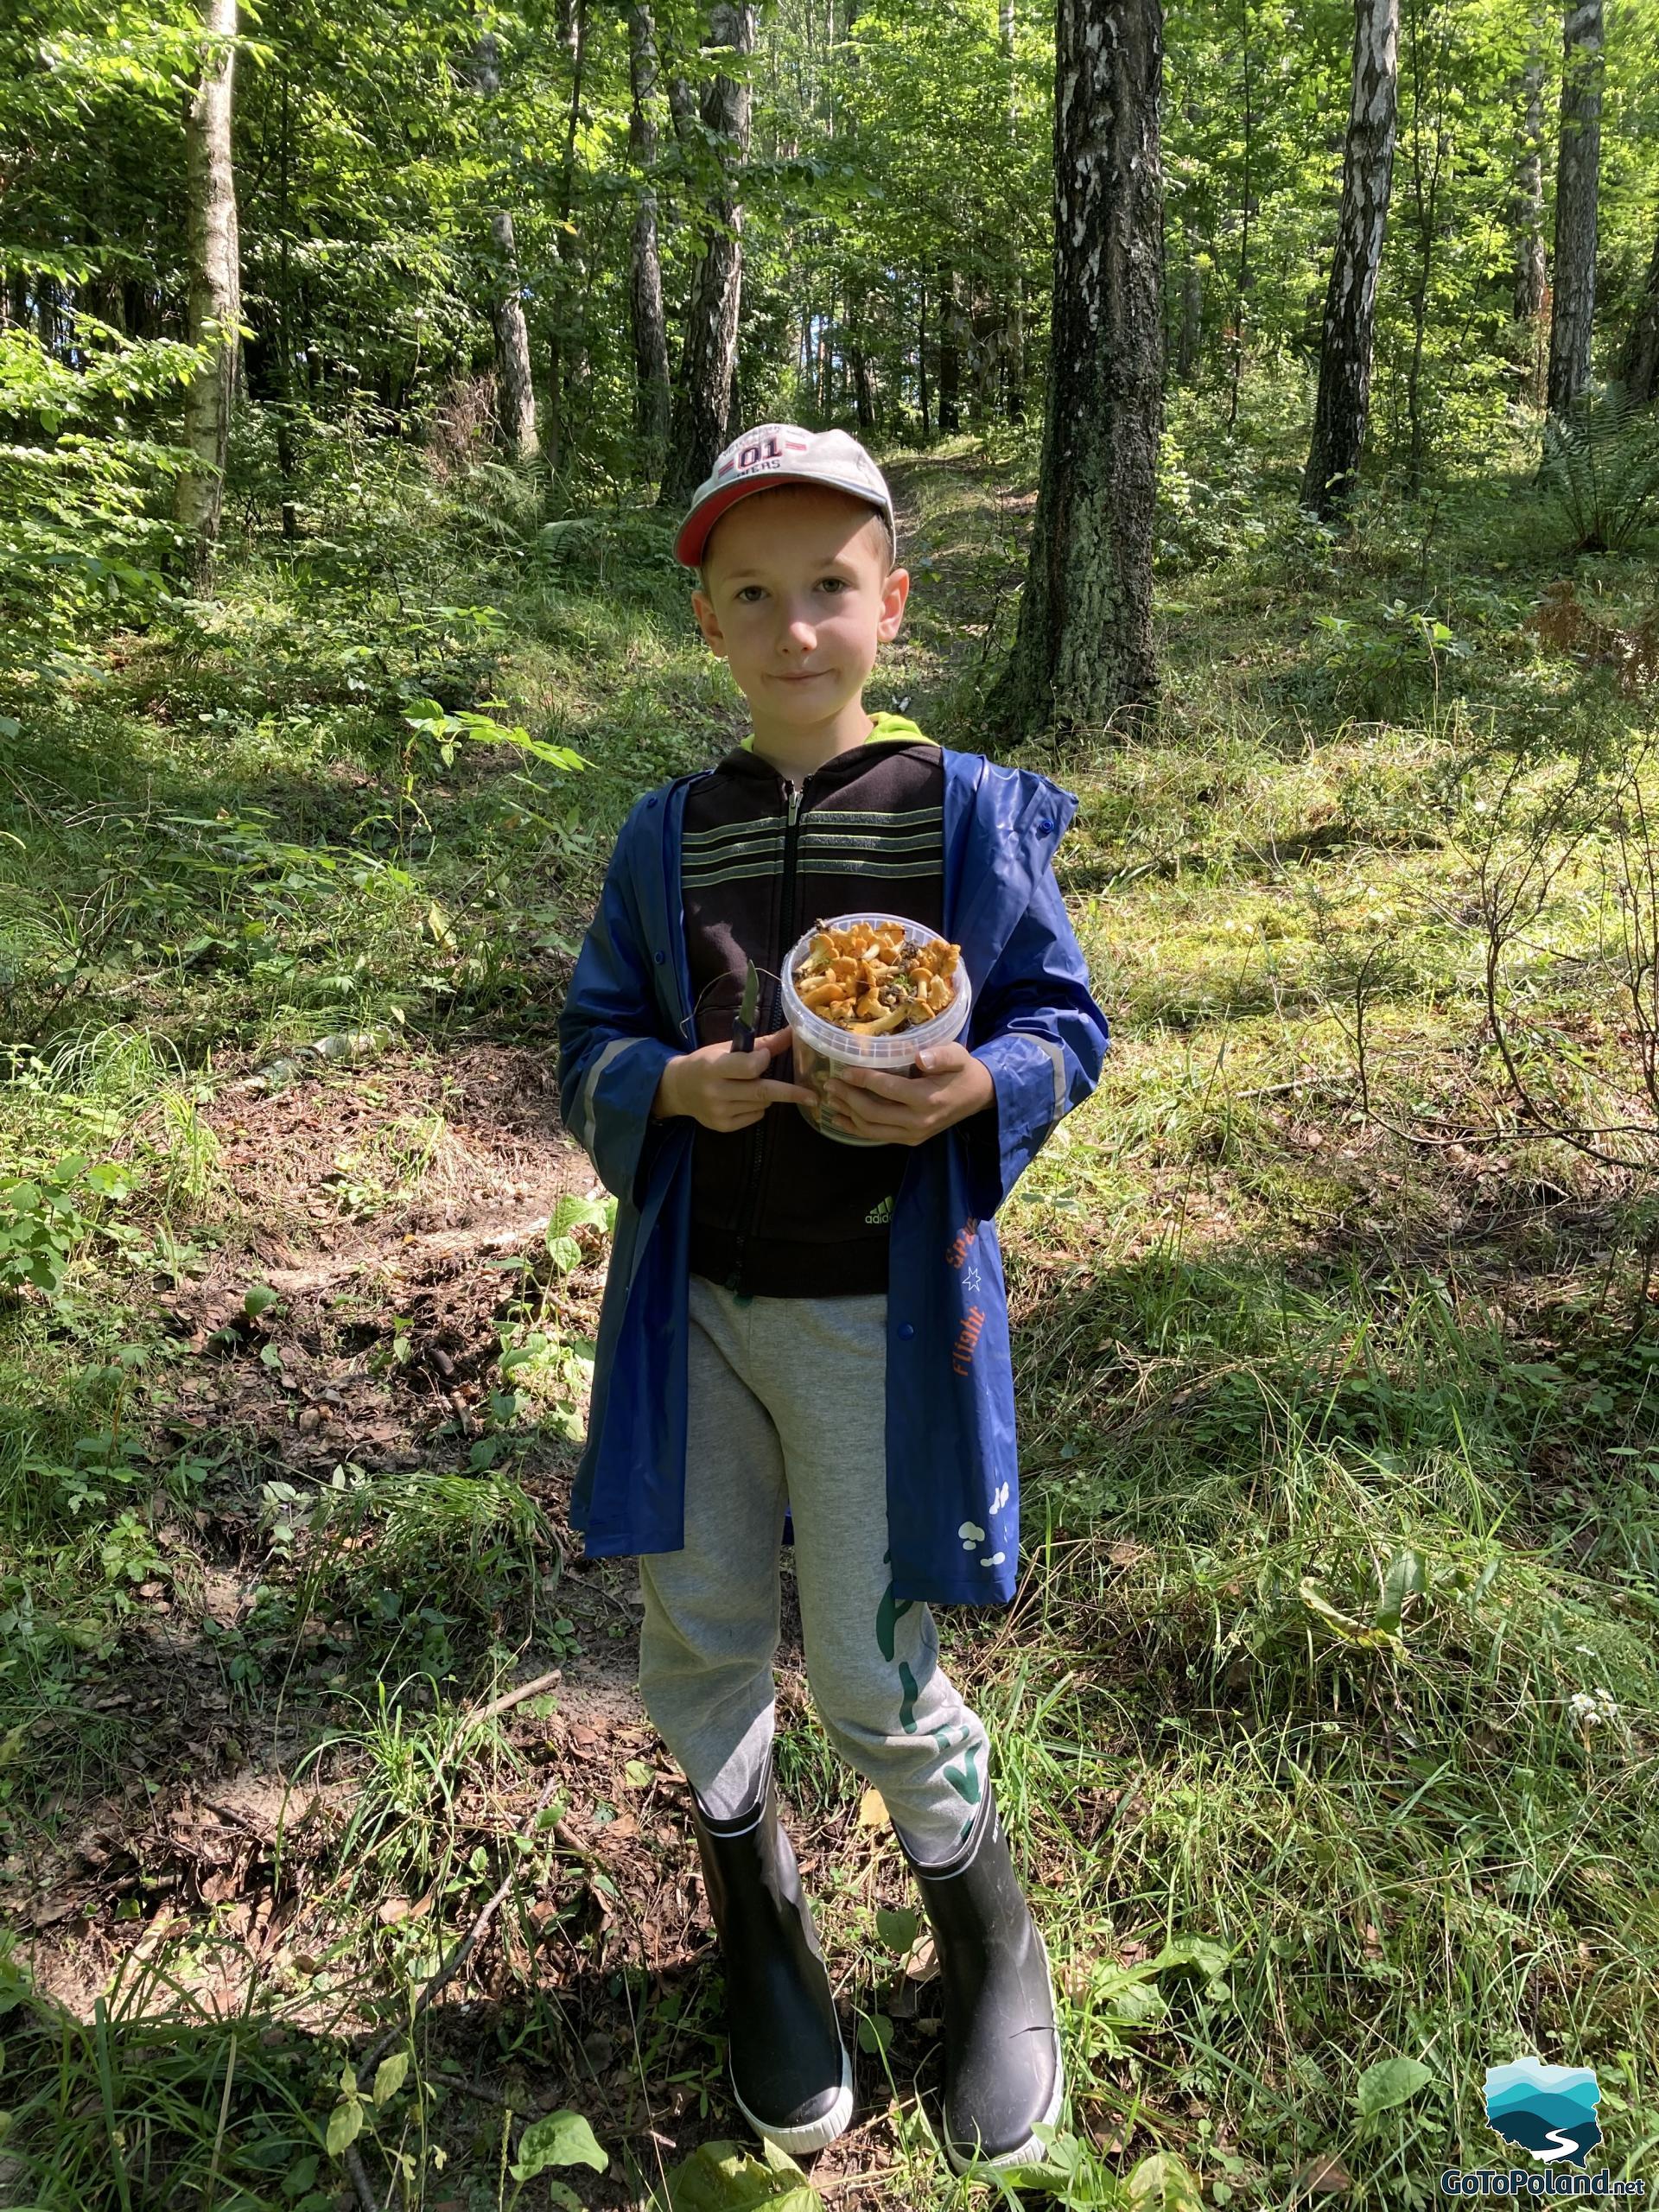 A boy with a basket full of mushrooms in a forest